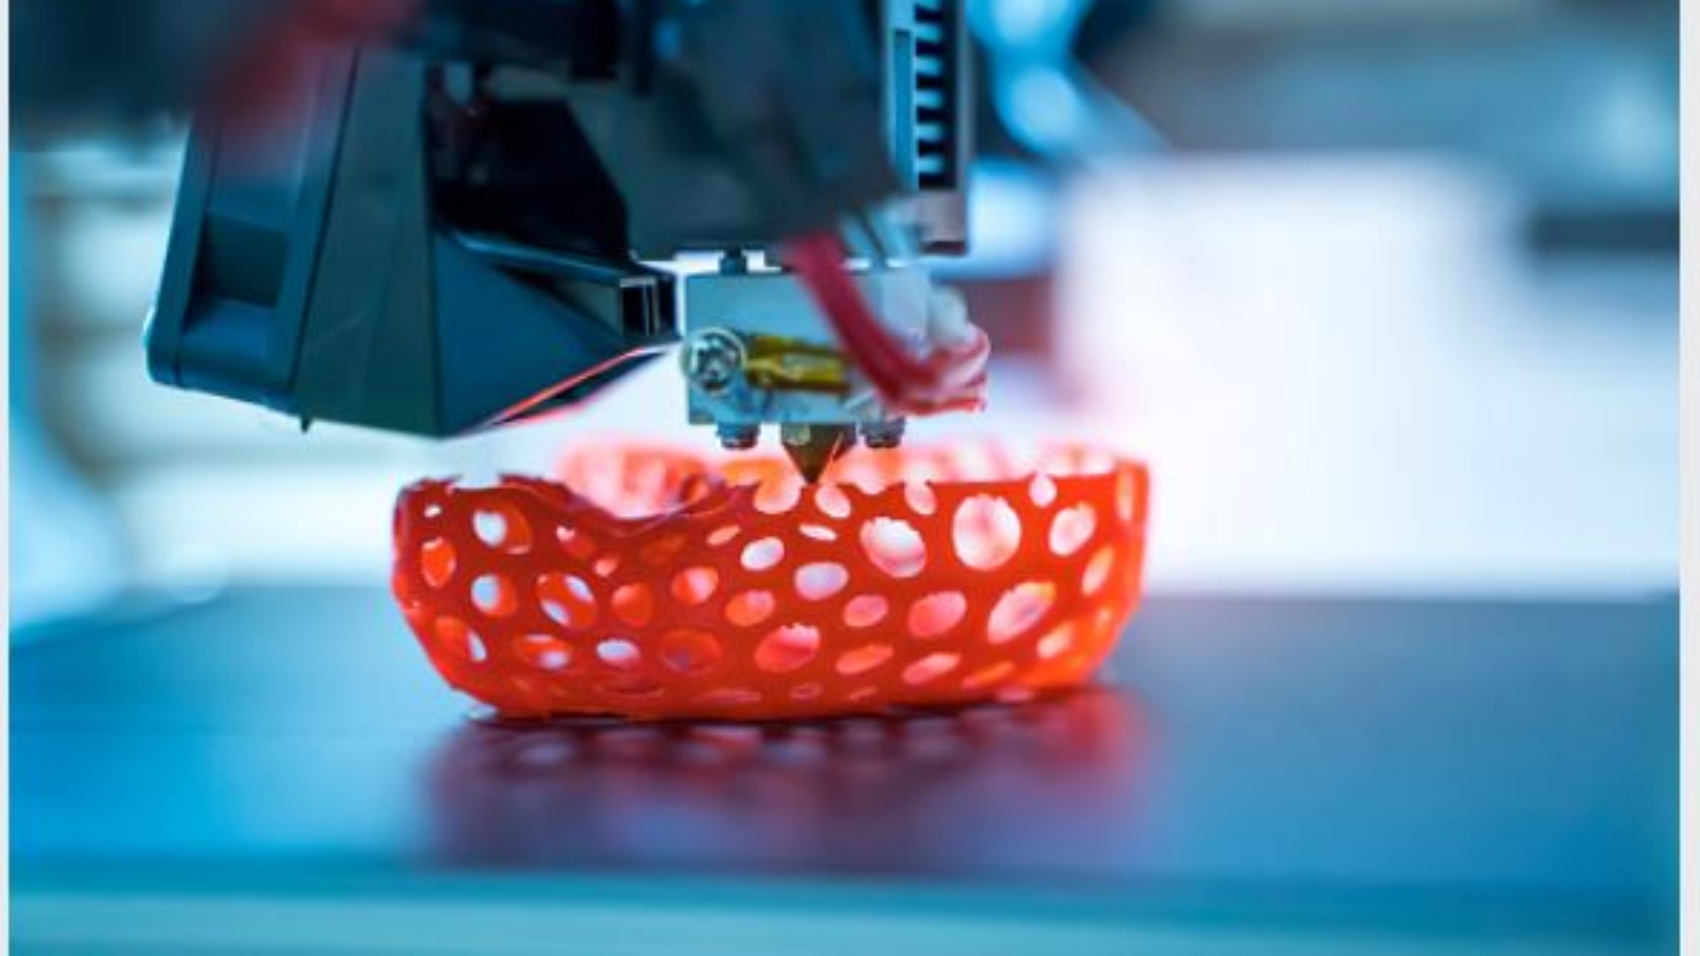 ild ved siden af interferens The Ultimate Healthcare Disruptor: Medical 3D Printing Market On The Rise |  The Healthcare Technology Report.